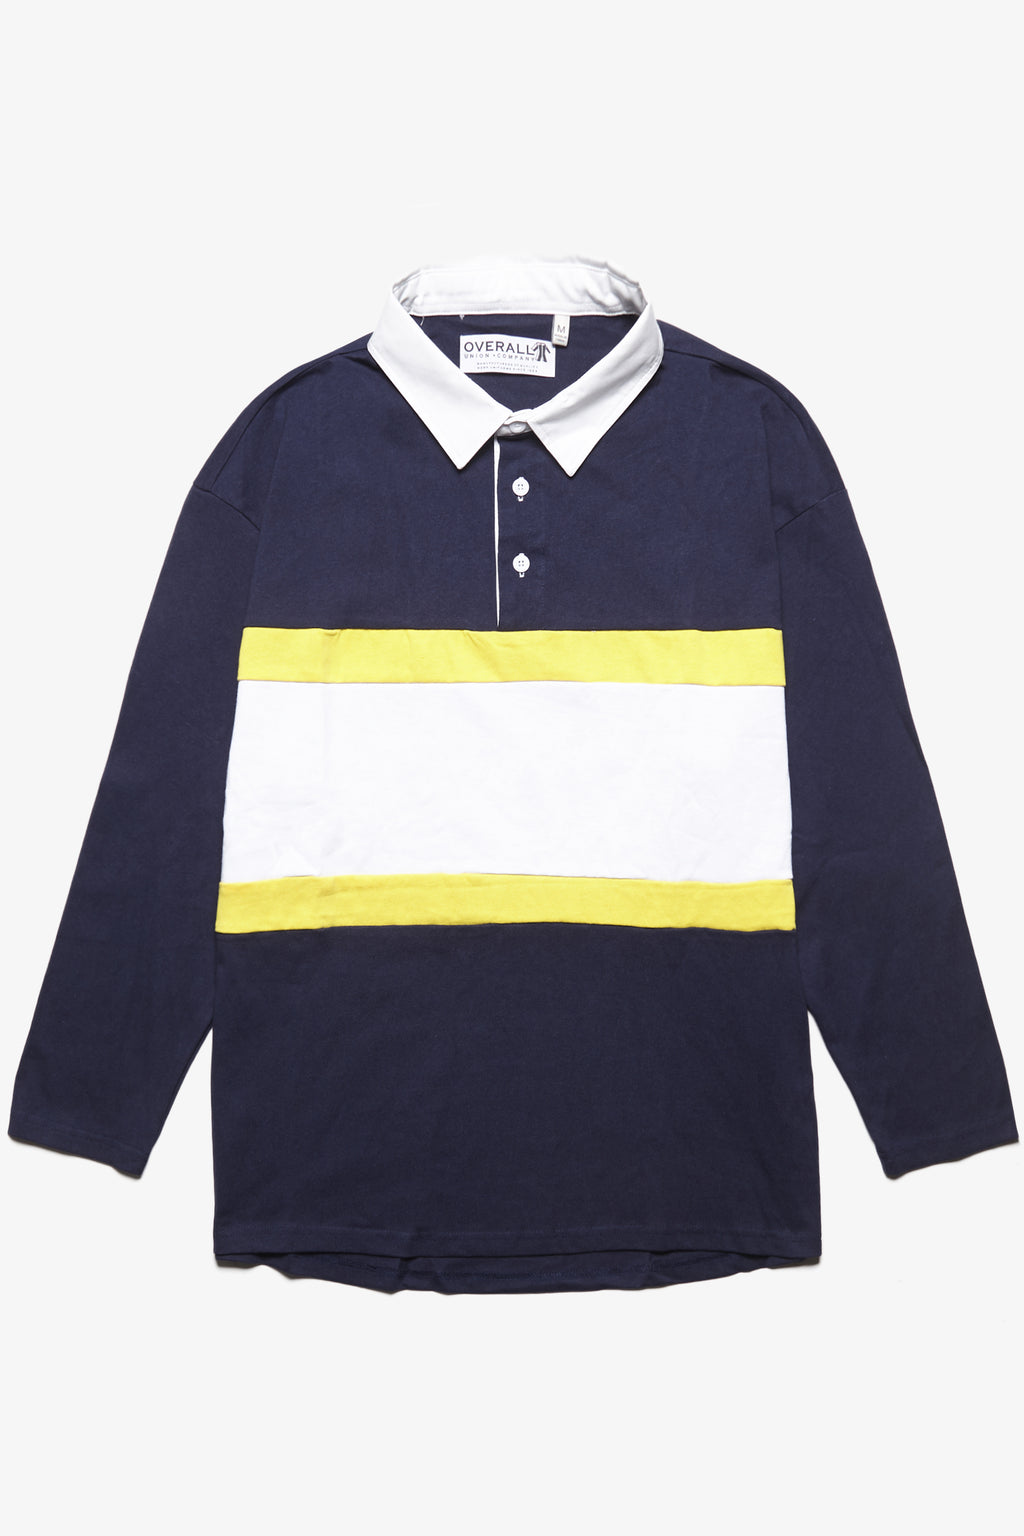 Overall Union - Field Rugby Shirt - Navy